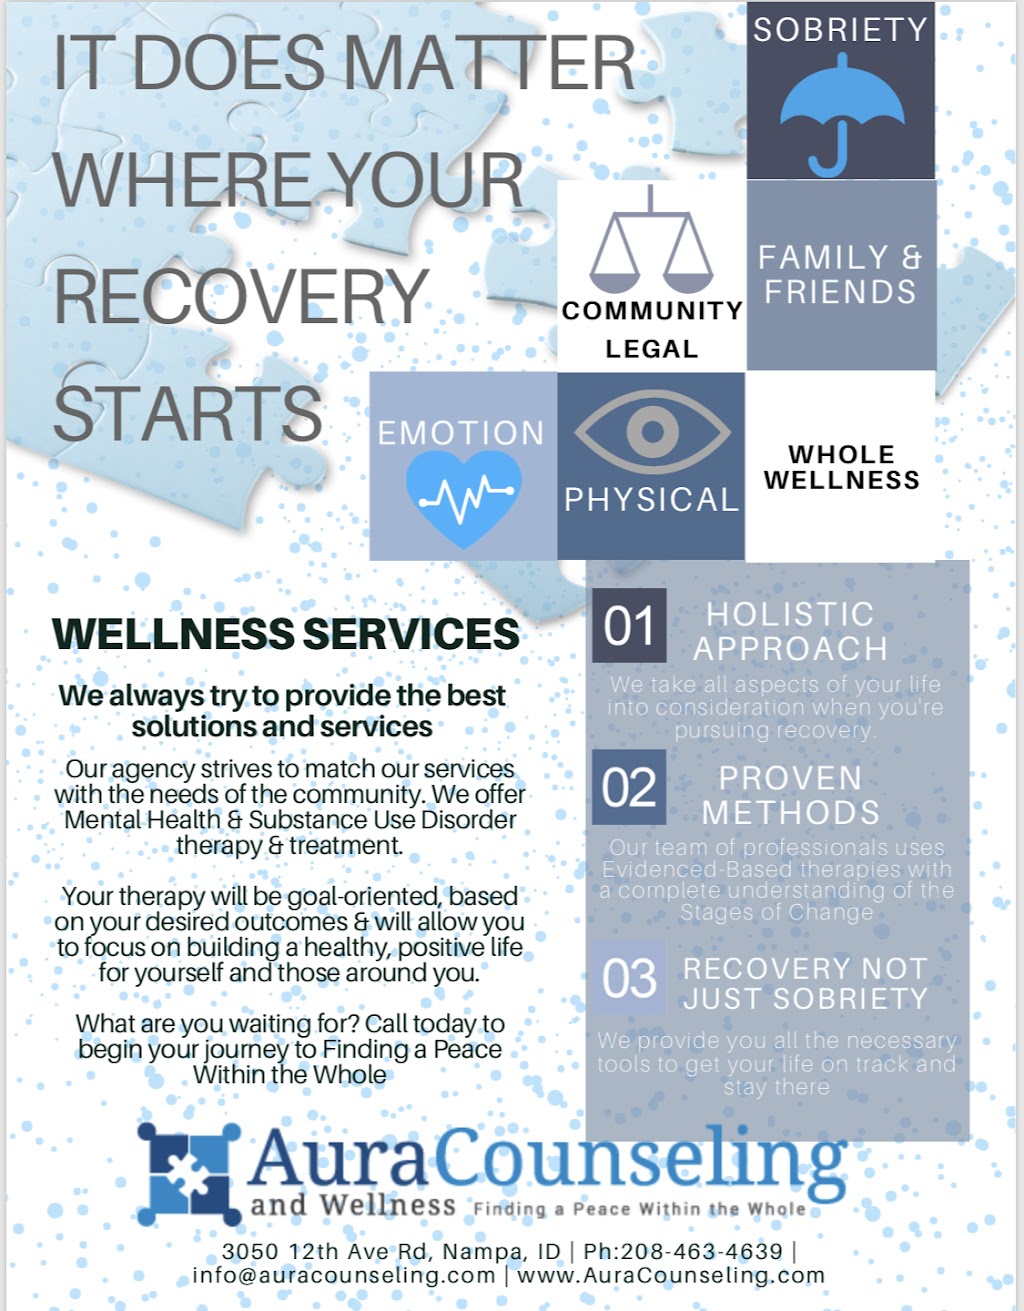 Aura Counseling and Wellness | 3050 12th Ave Rd, Nampa, ID 83686, USA | Phone: (208) 463-4639